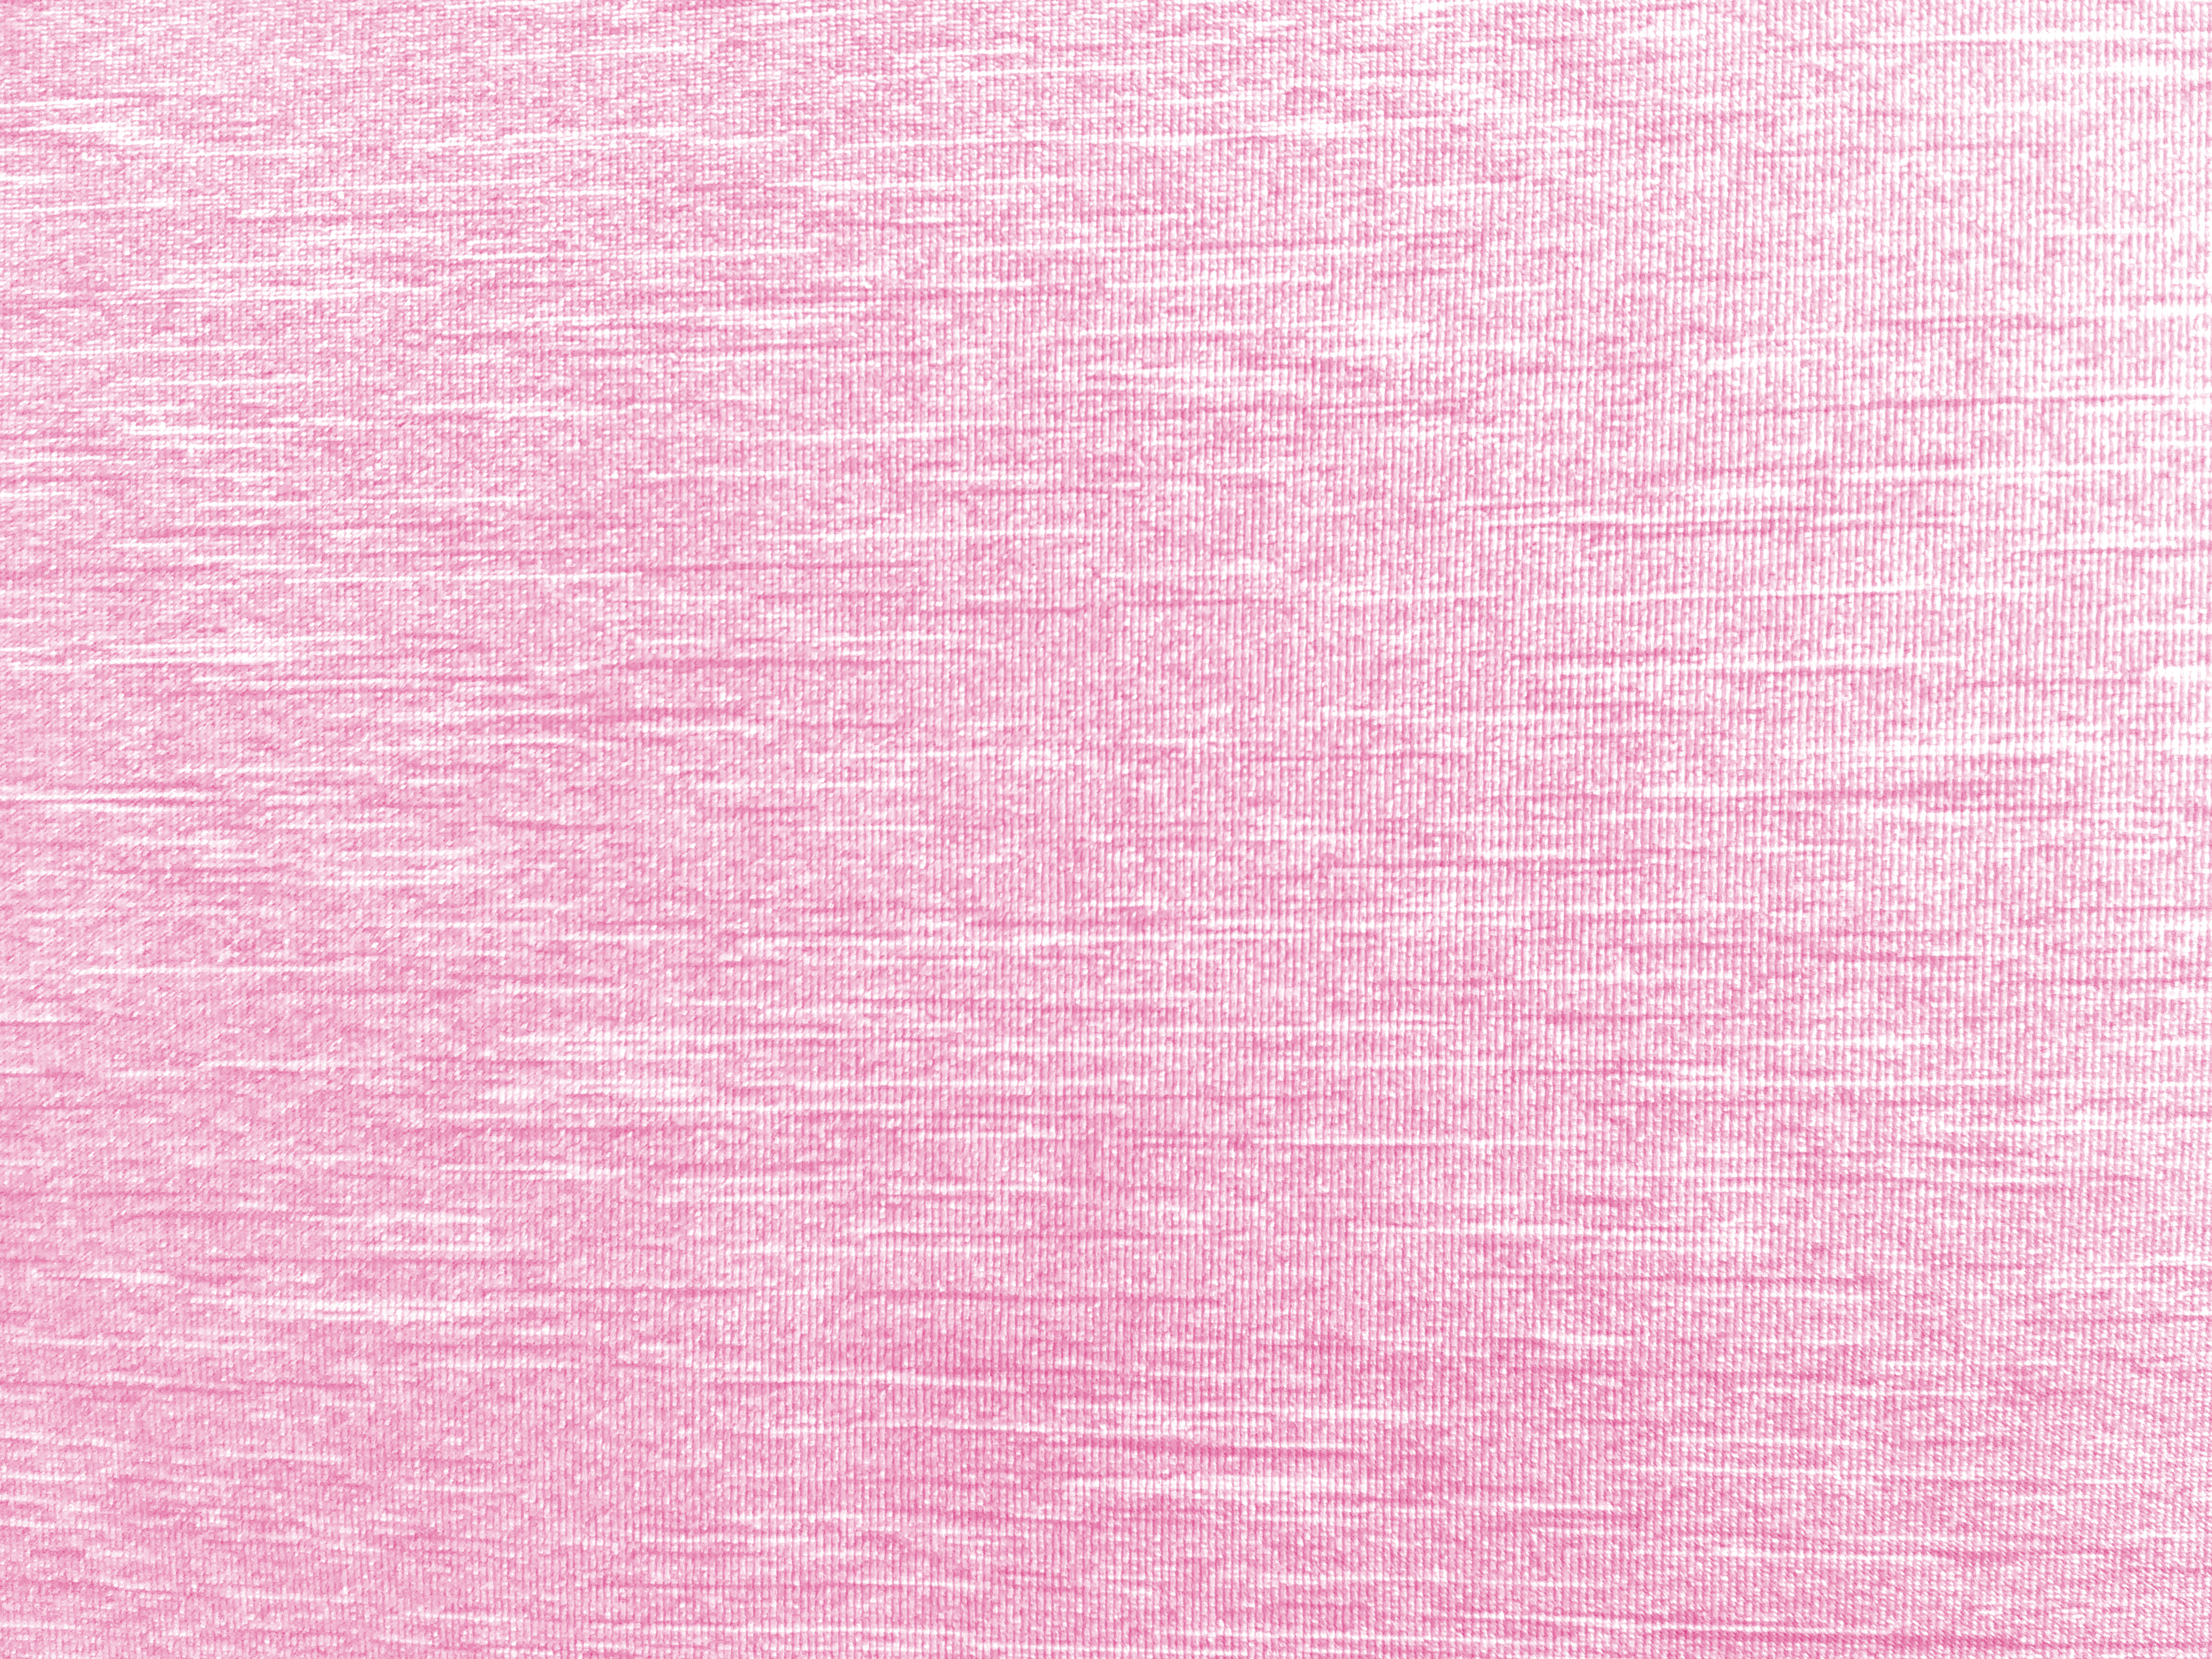 Pink Variegated Knit Fabric Texture Picture Free Photograph Photos | My ...